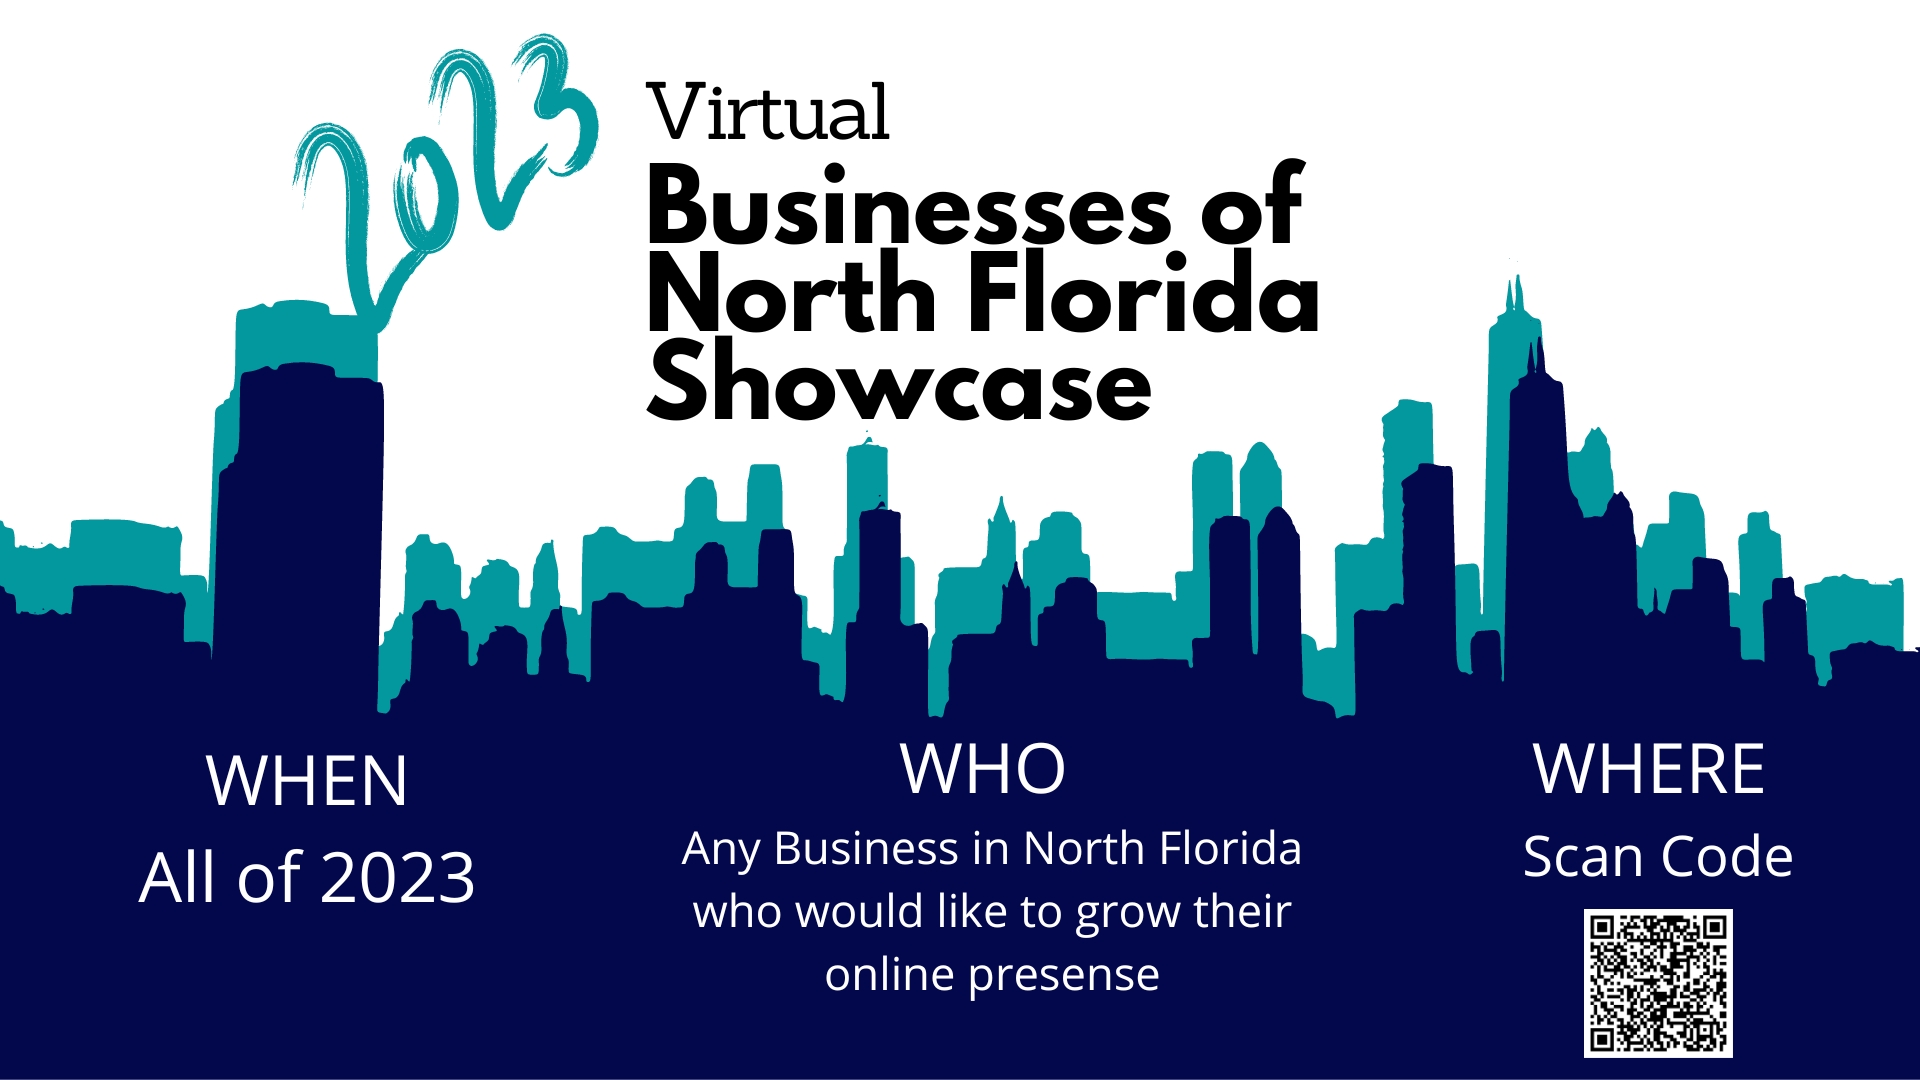 2023 Virtual Businesses of North Florida Showcase cover image